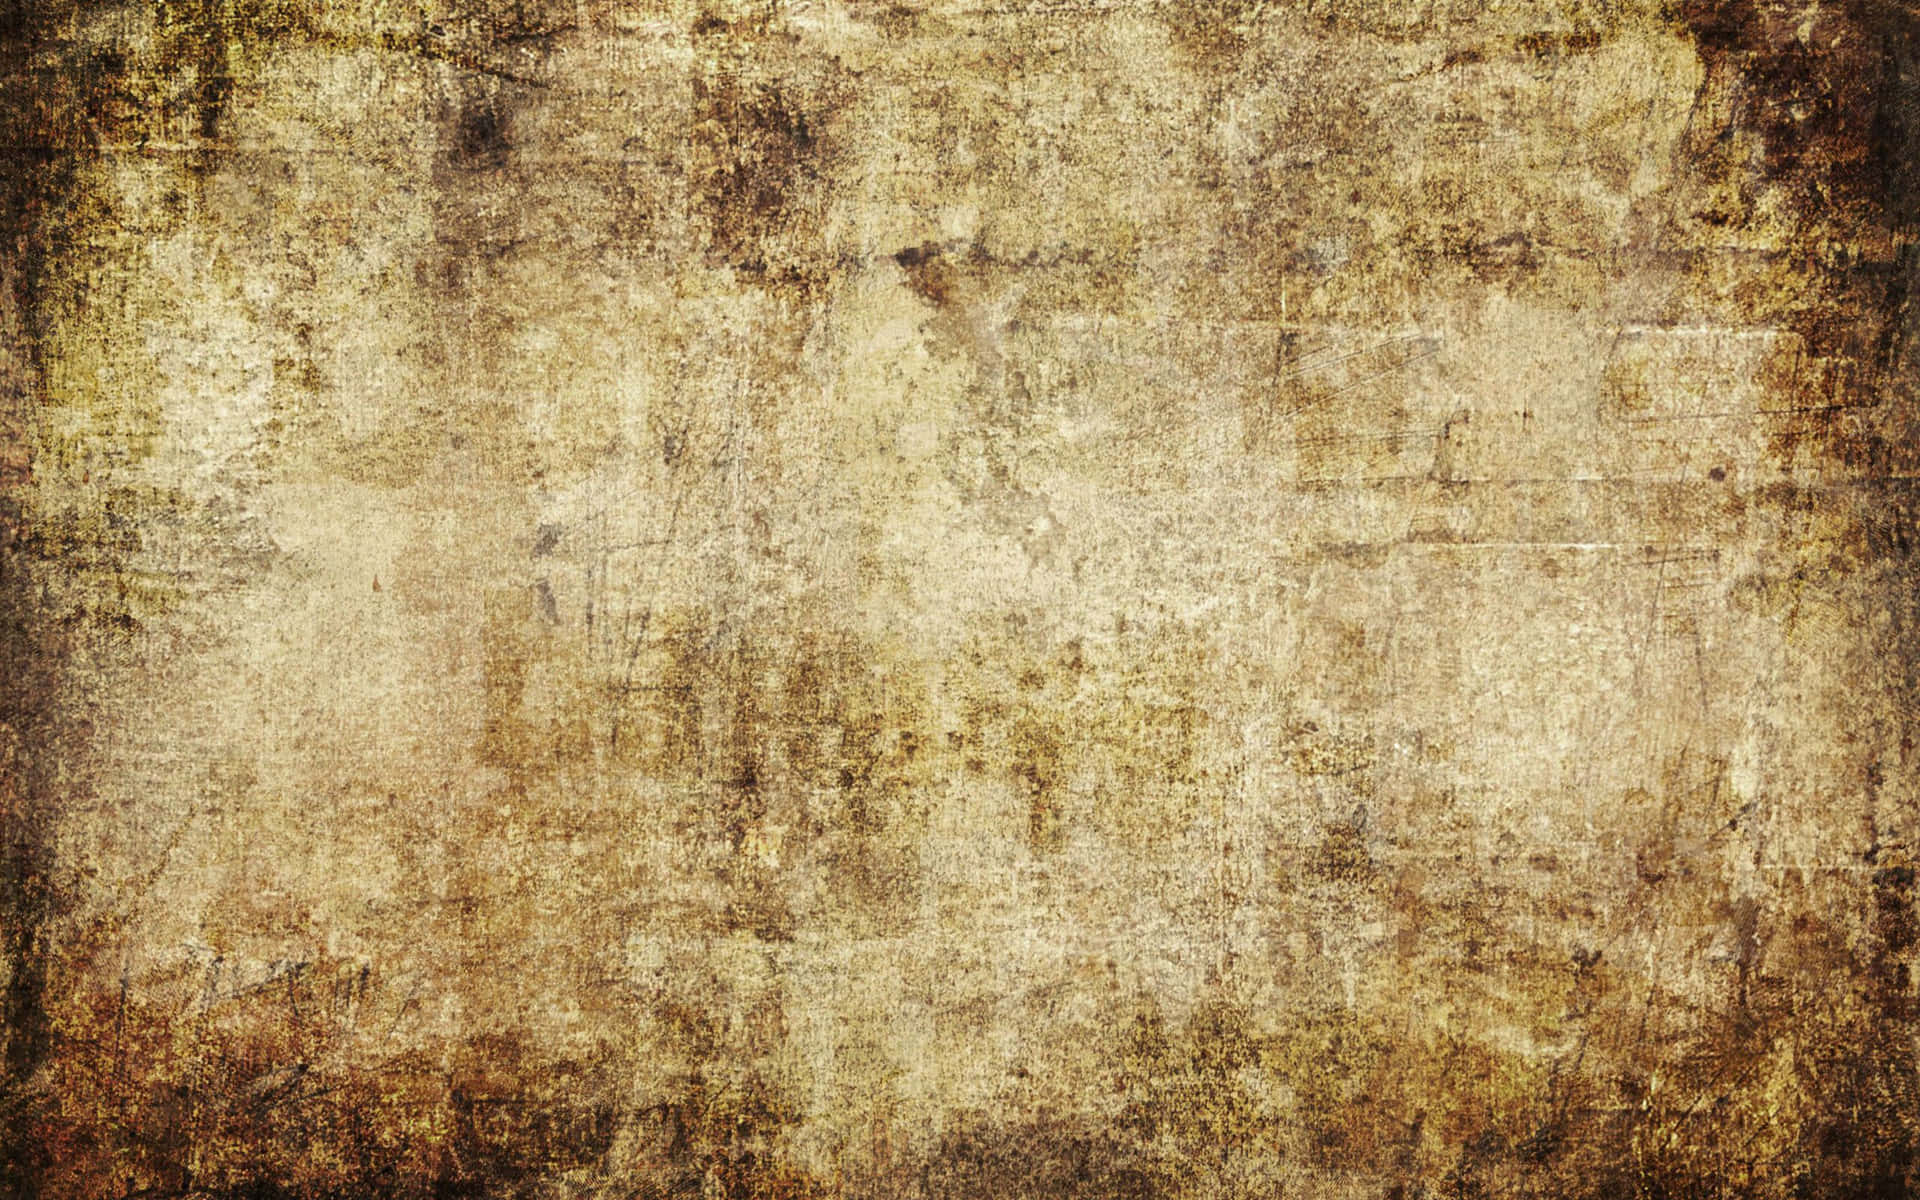 Grunge Texture Pictures